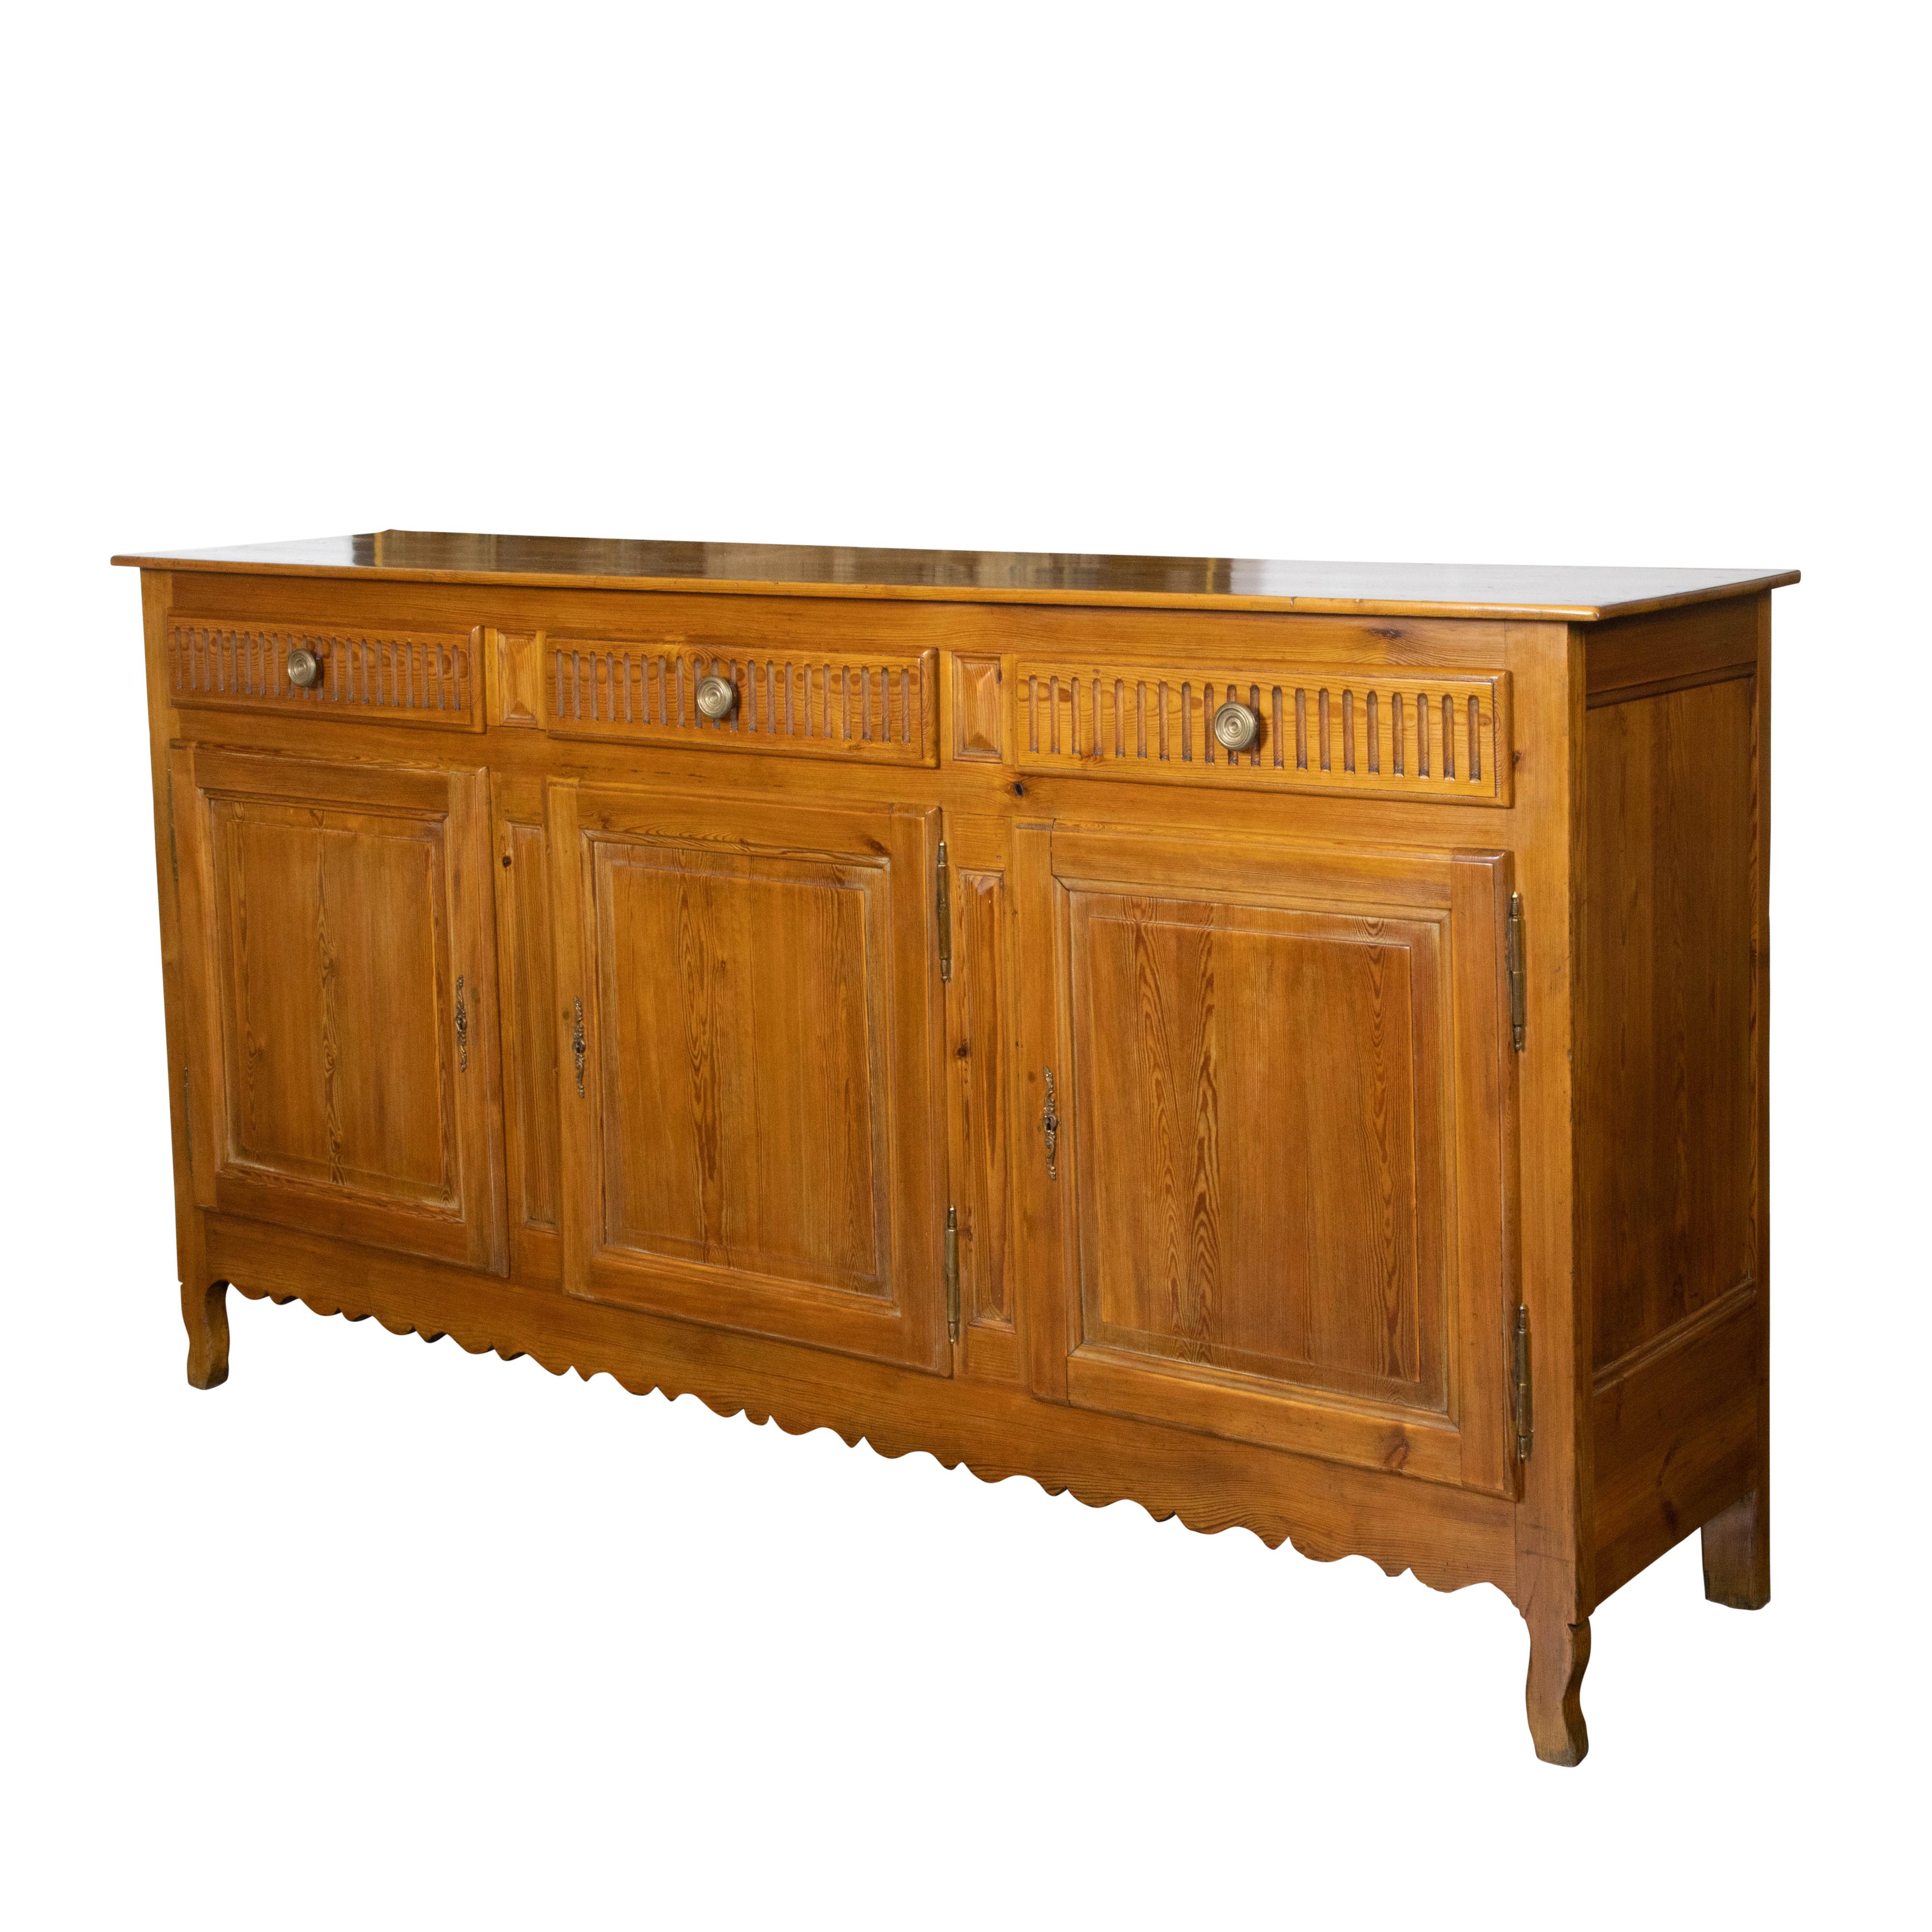 French Transition Style 19th Century Pine Buffet with Drawers over Doors For Sale 2